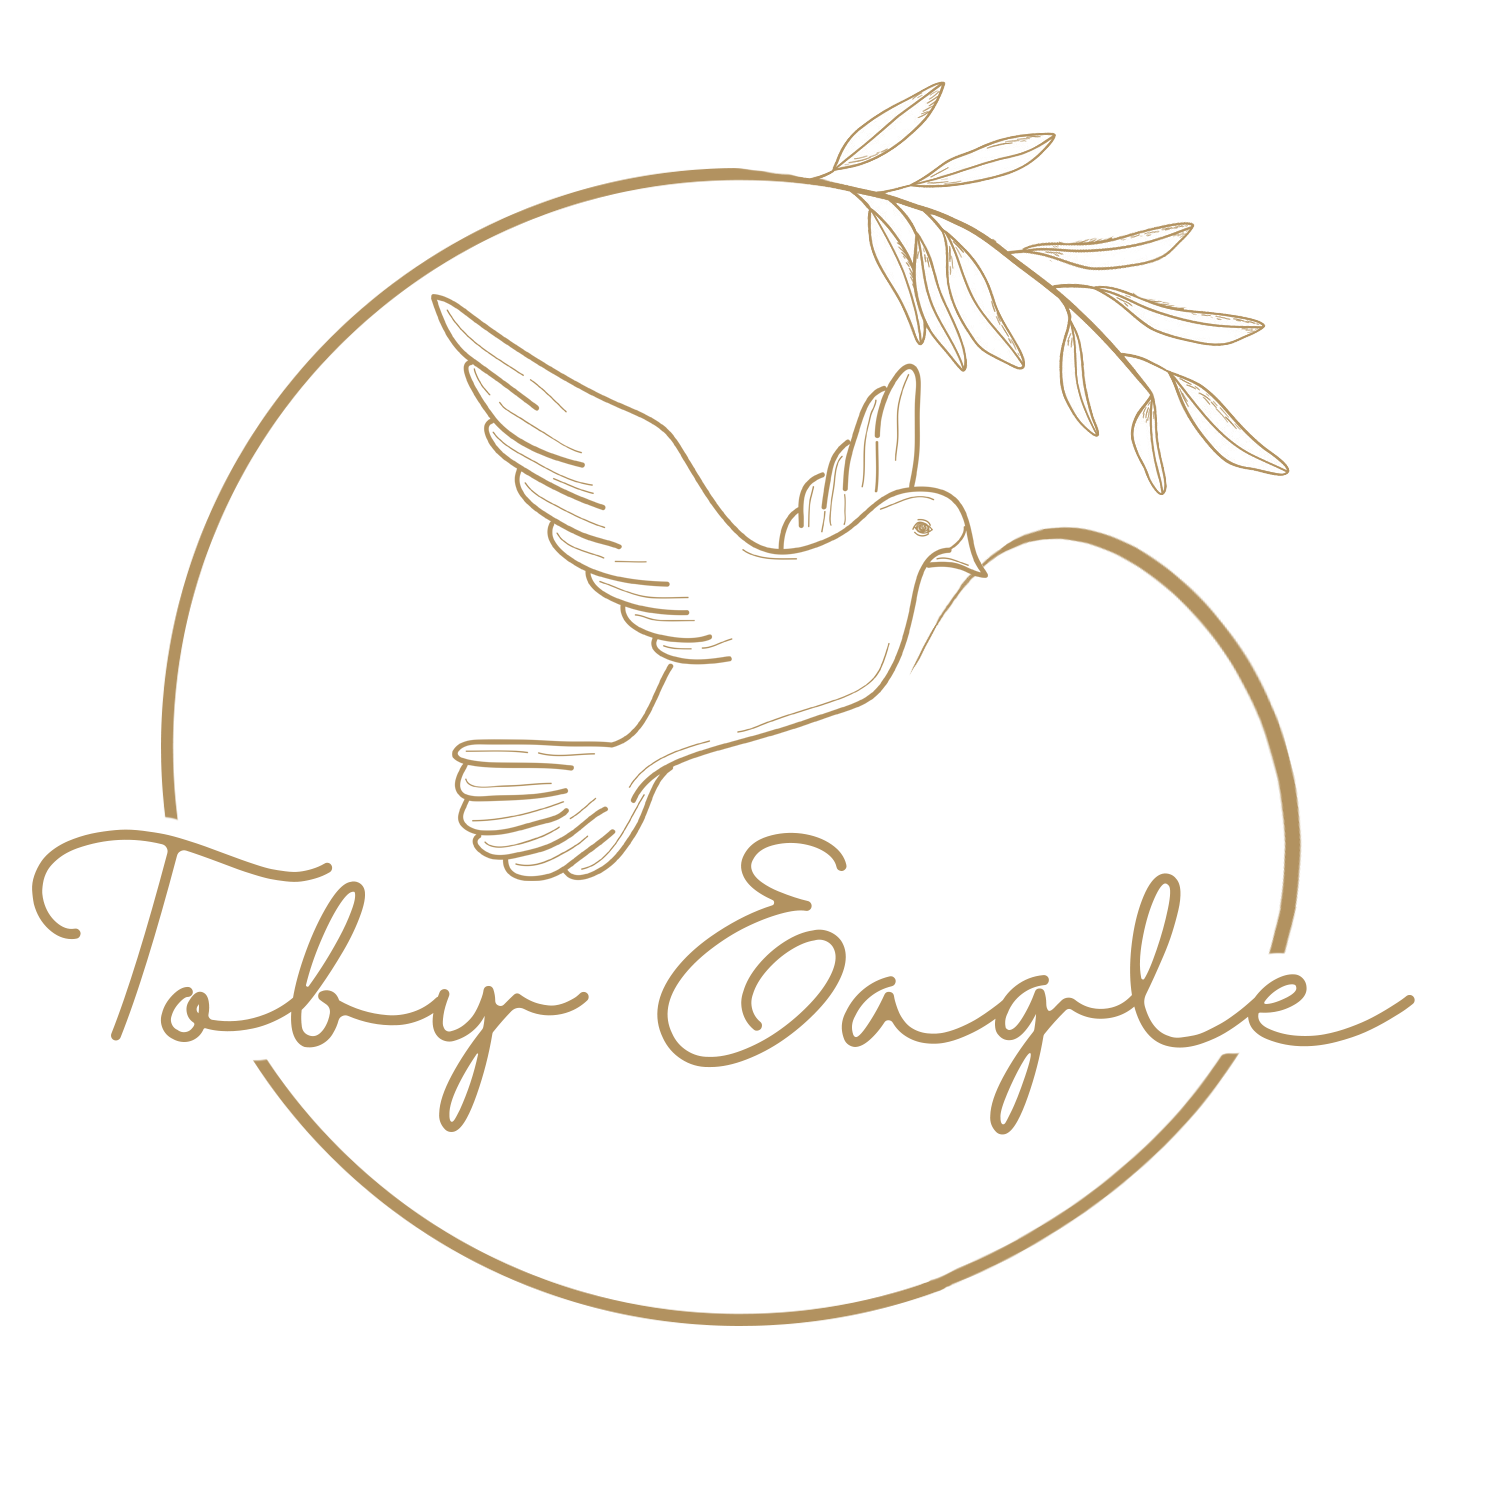 In Memory of Toby Eagle